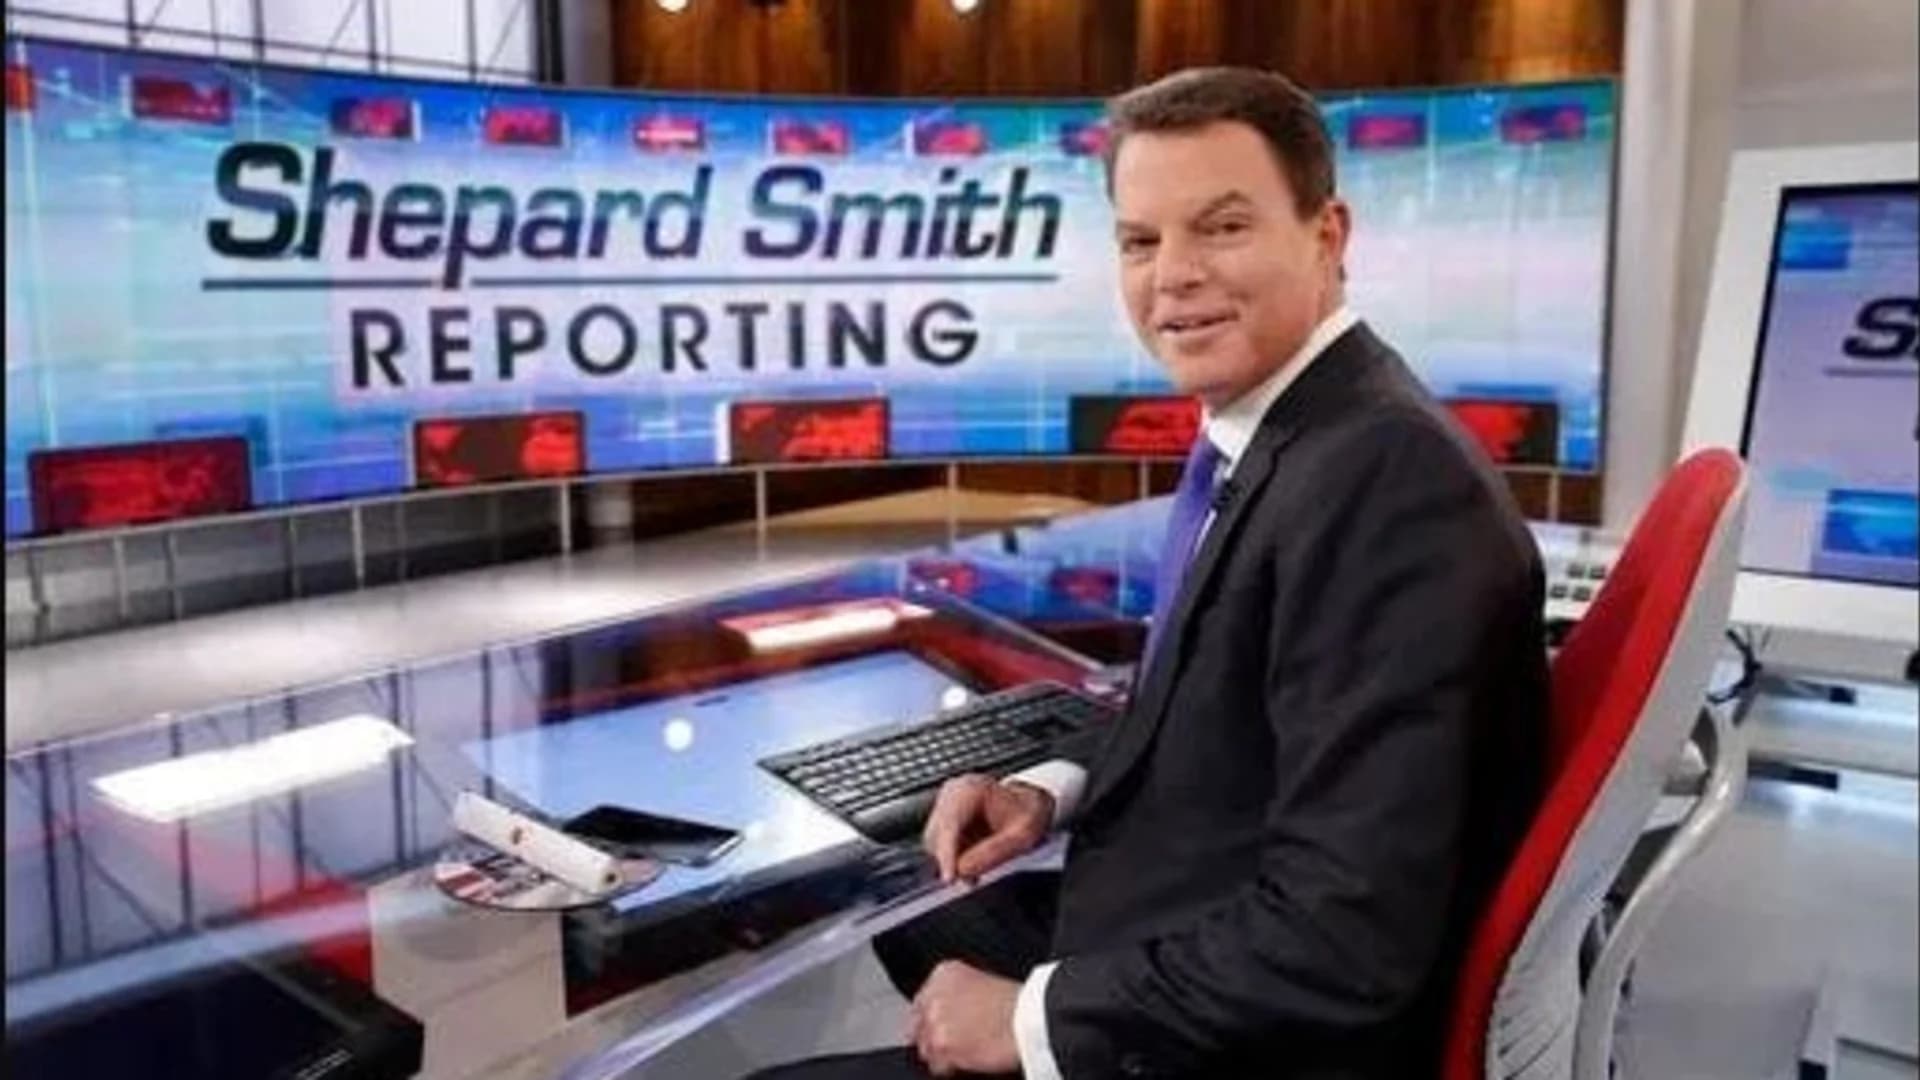 Shepard Smith abruptly leaves Fox News Channel after 23 years